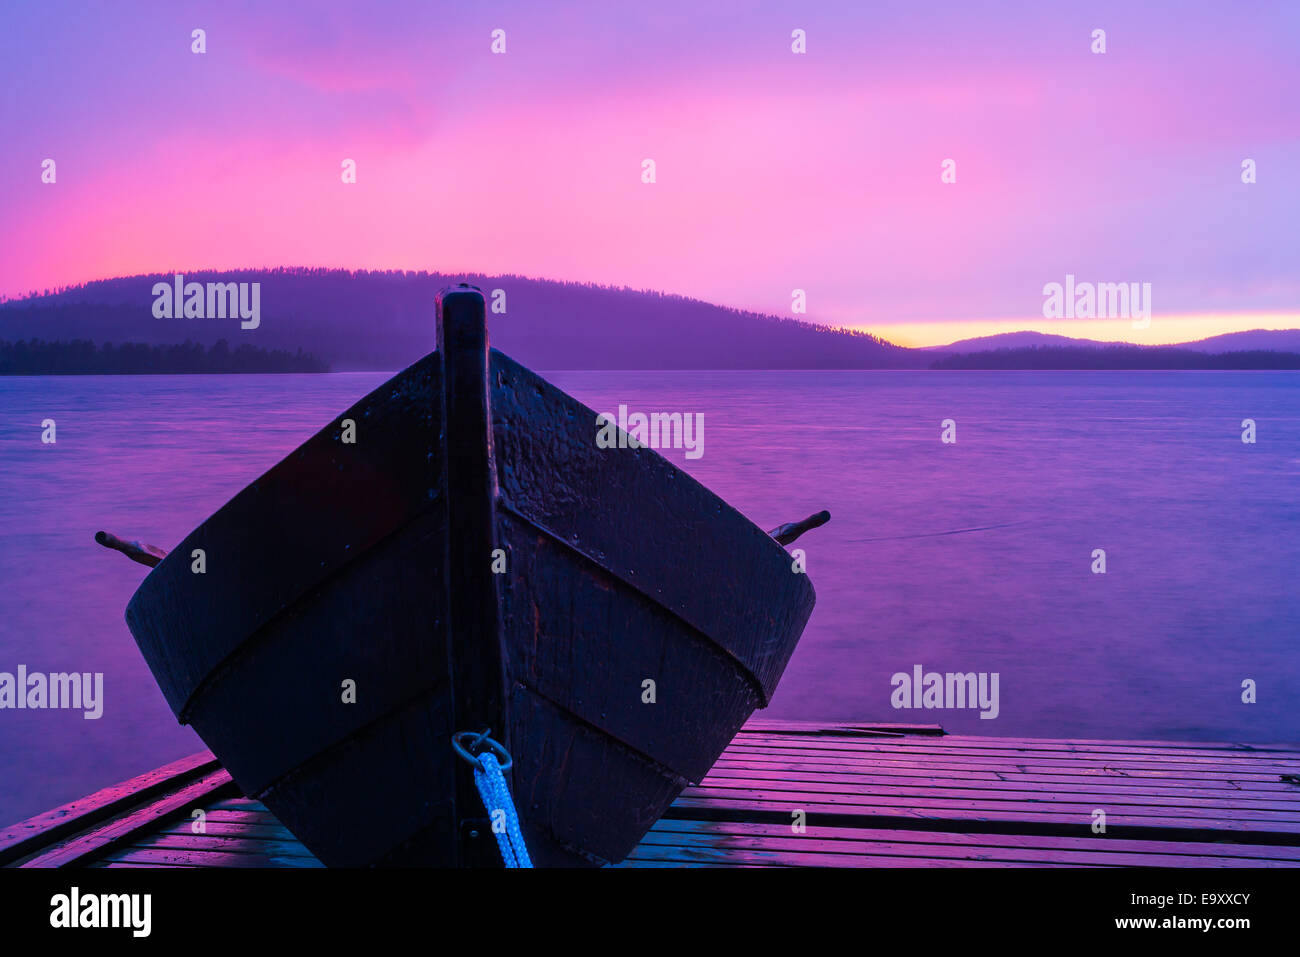 Lonely boat in colorful summer night. Stock Photo